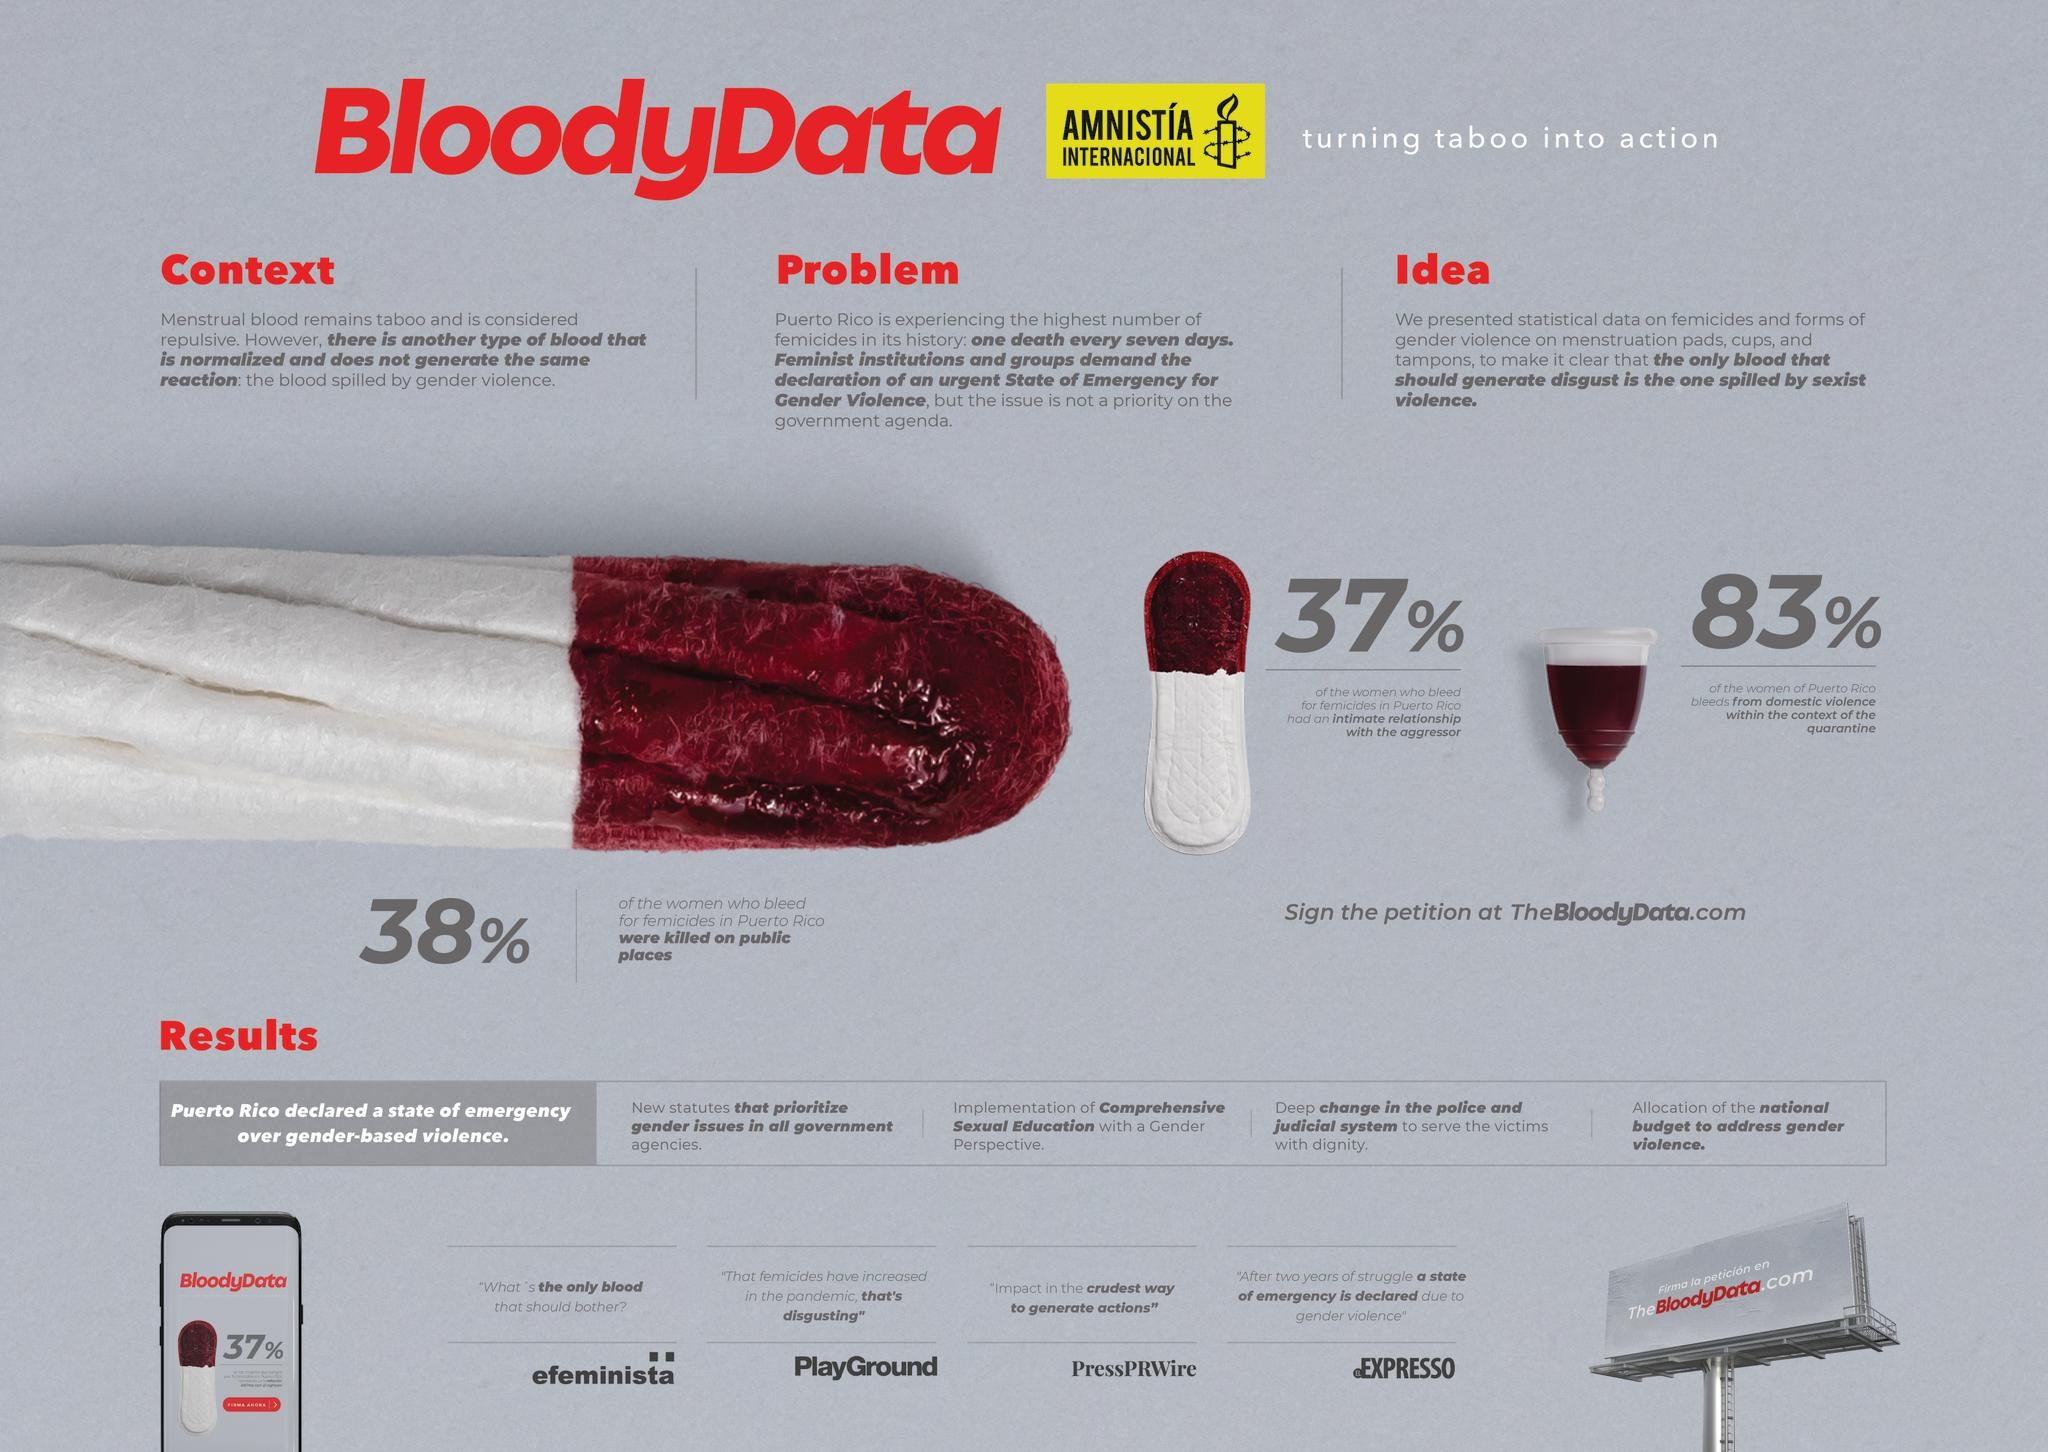 THE BLOODY DATA